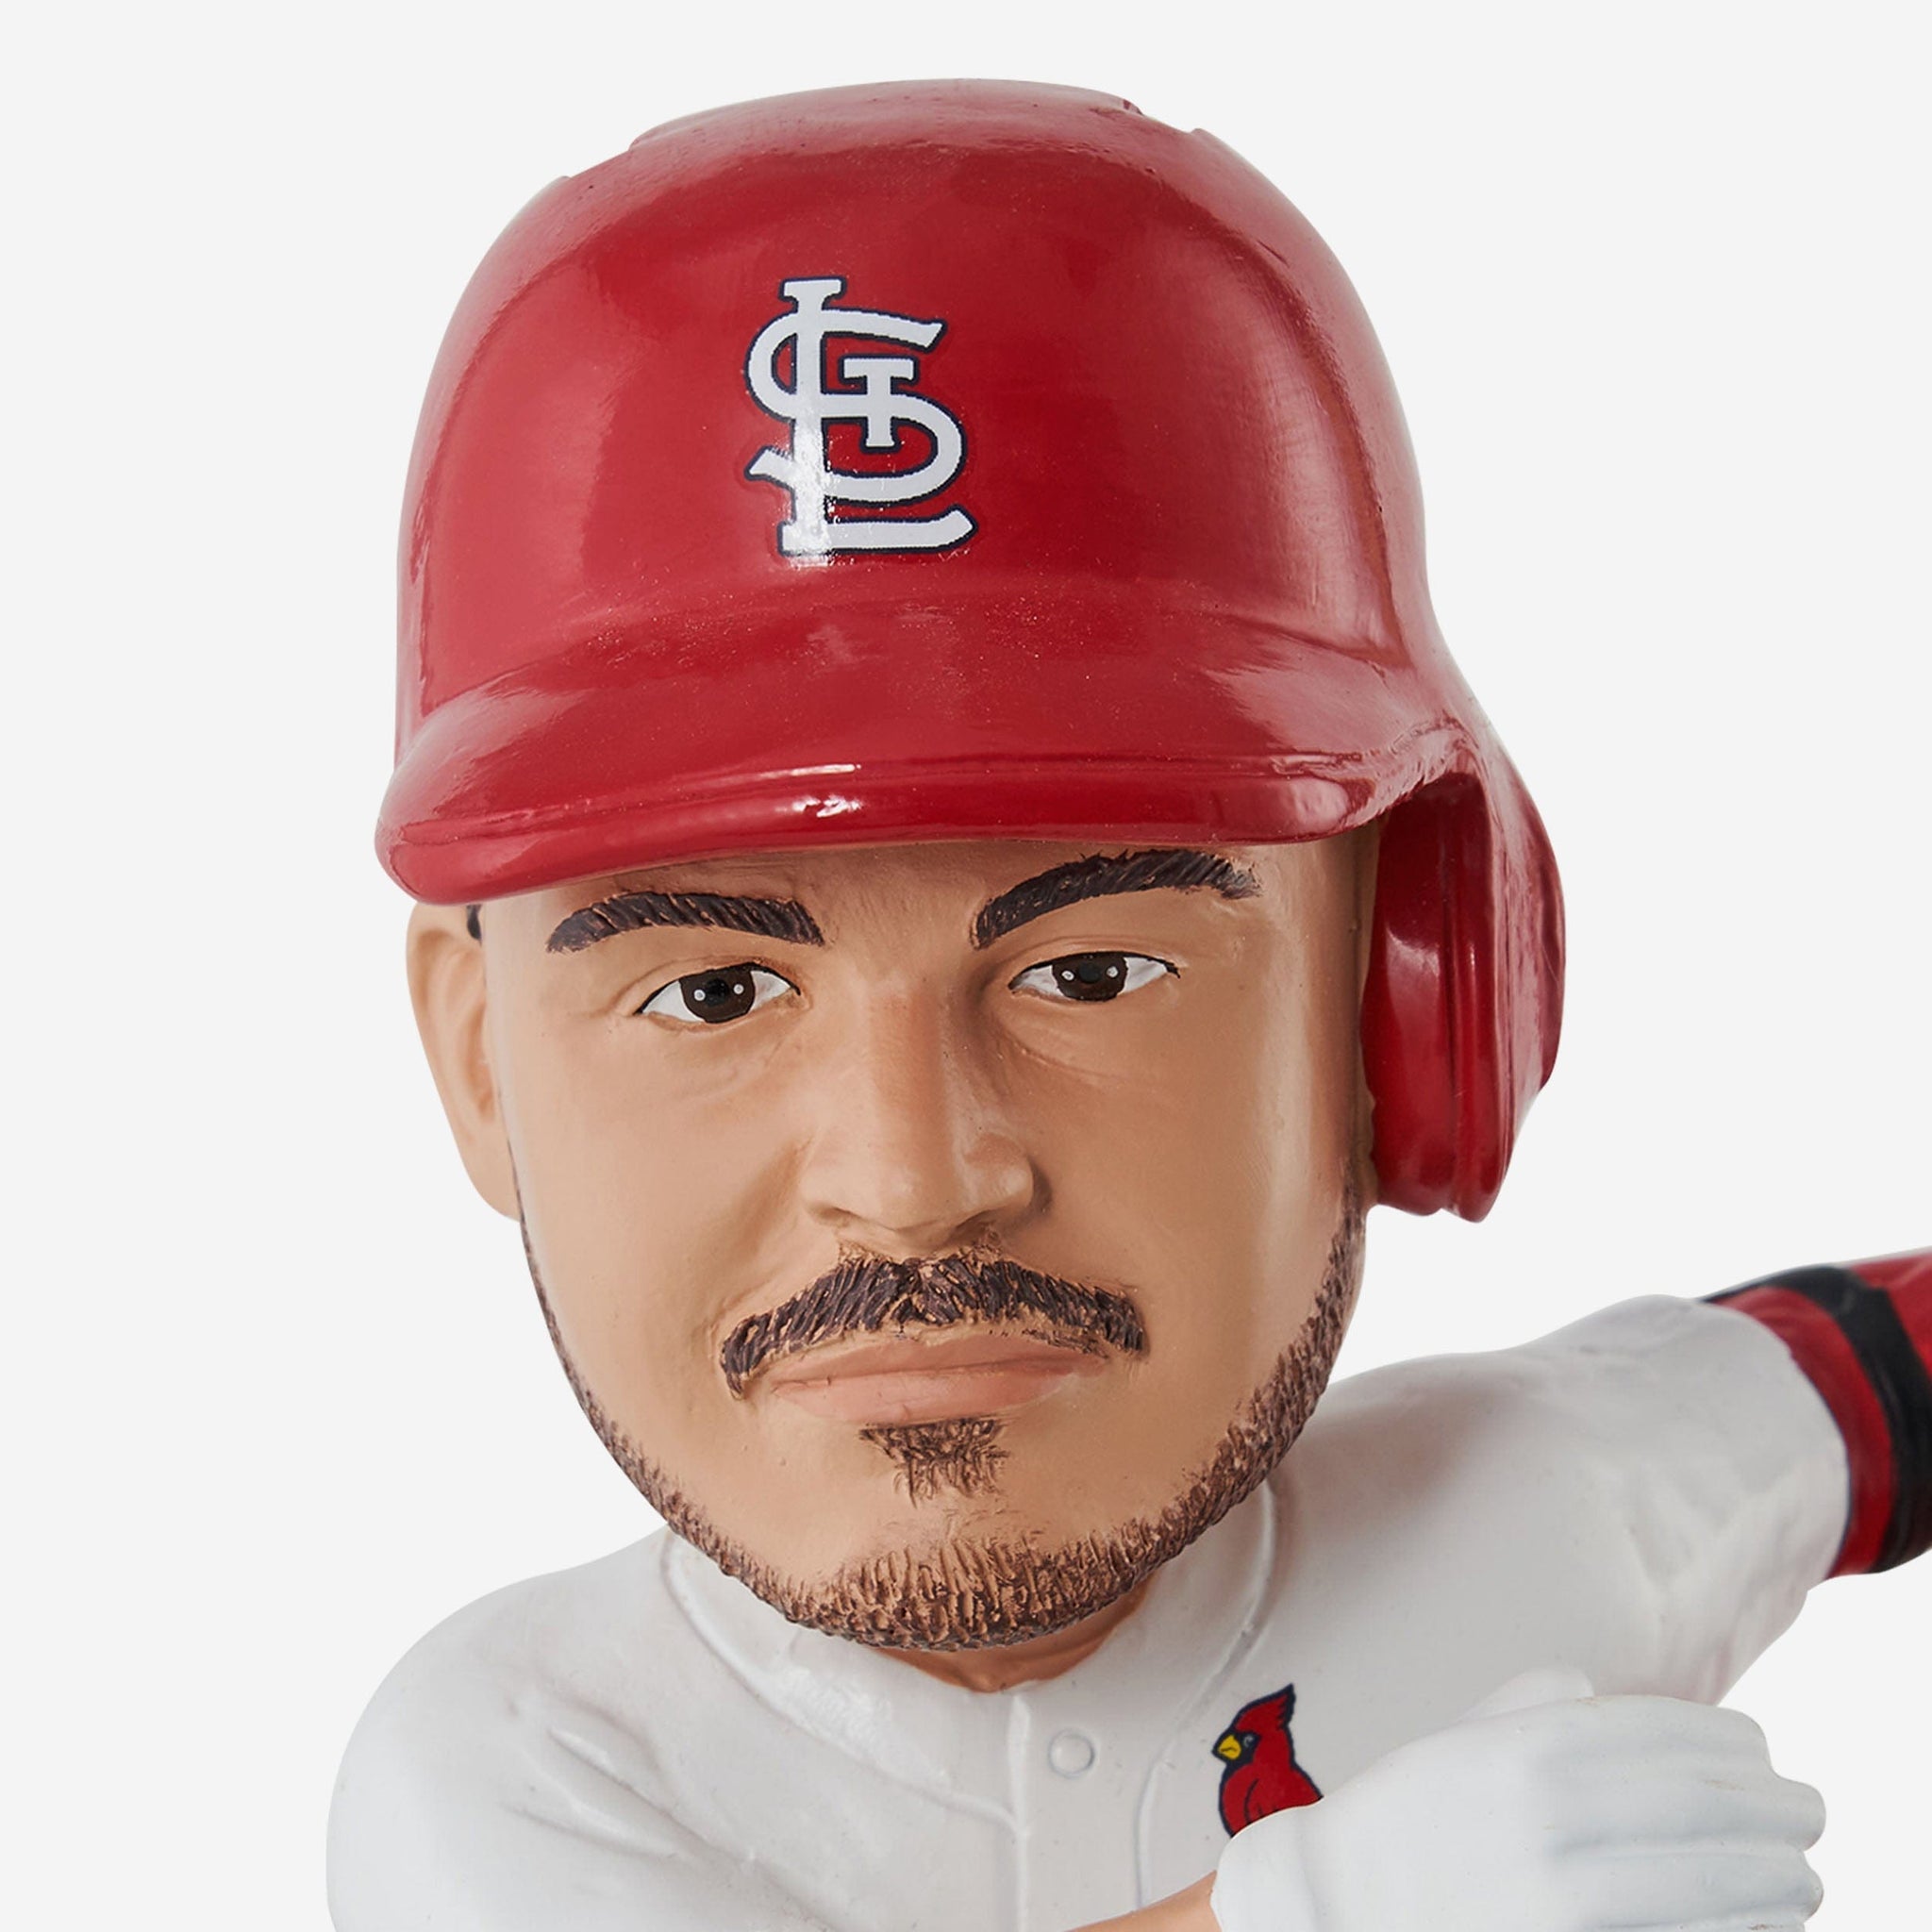 Nolan Arenado St Louis Cardinals Bank Bobblehead Officially Licensed by MLB